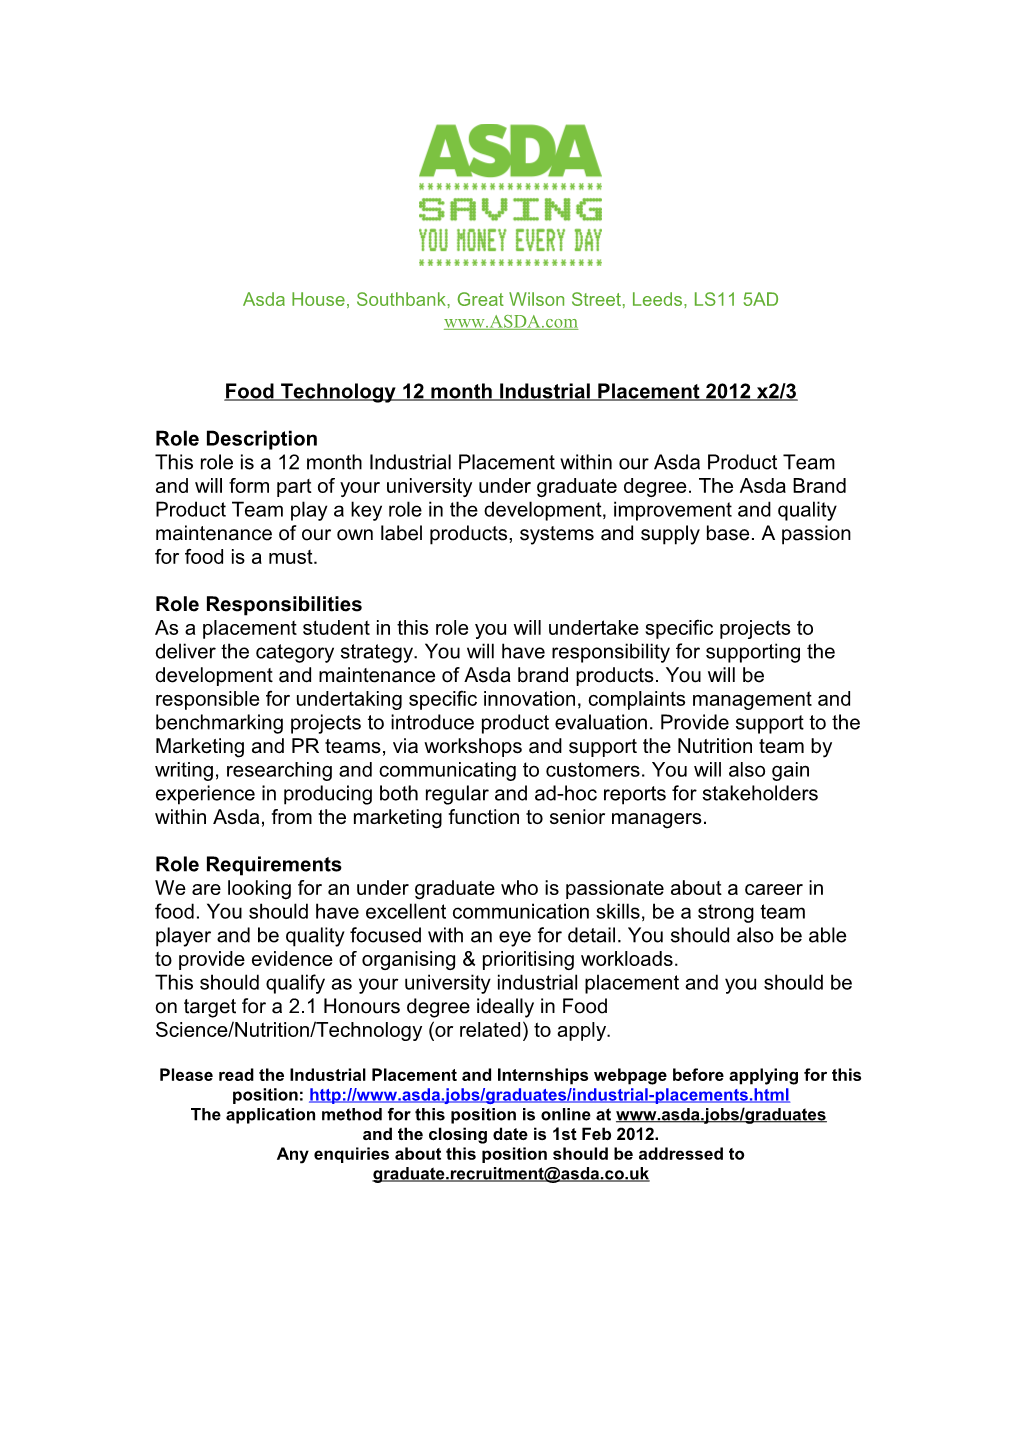 Food Technology 12 Month Industrial Placement 2012